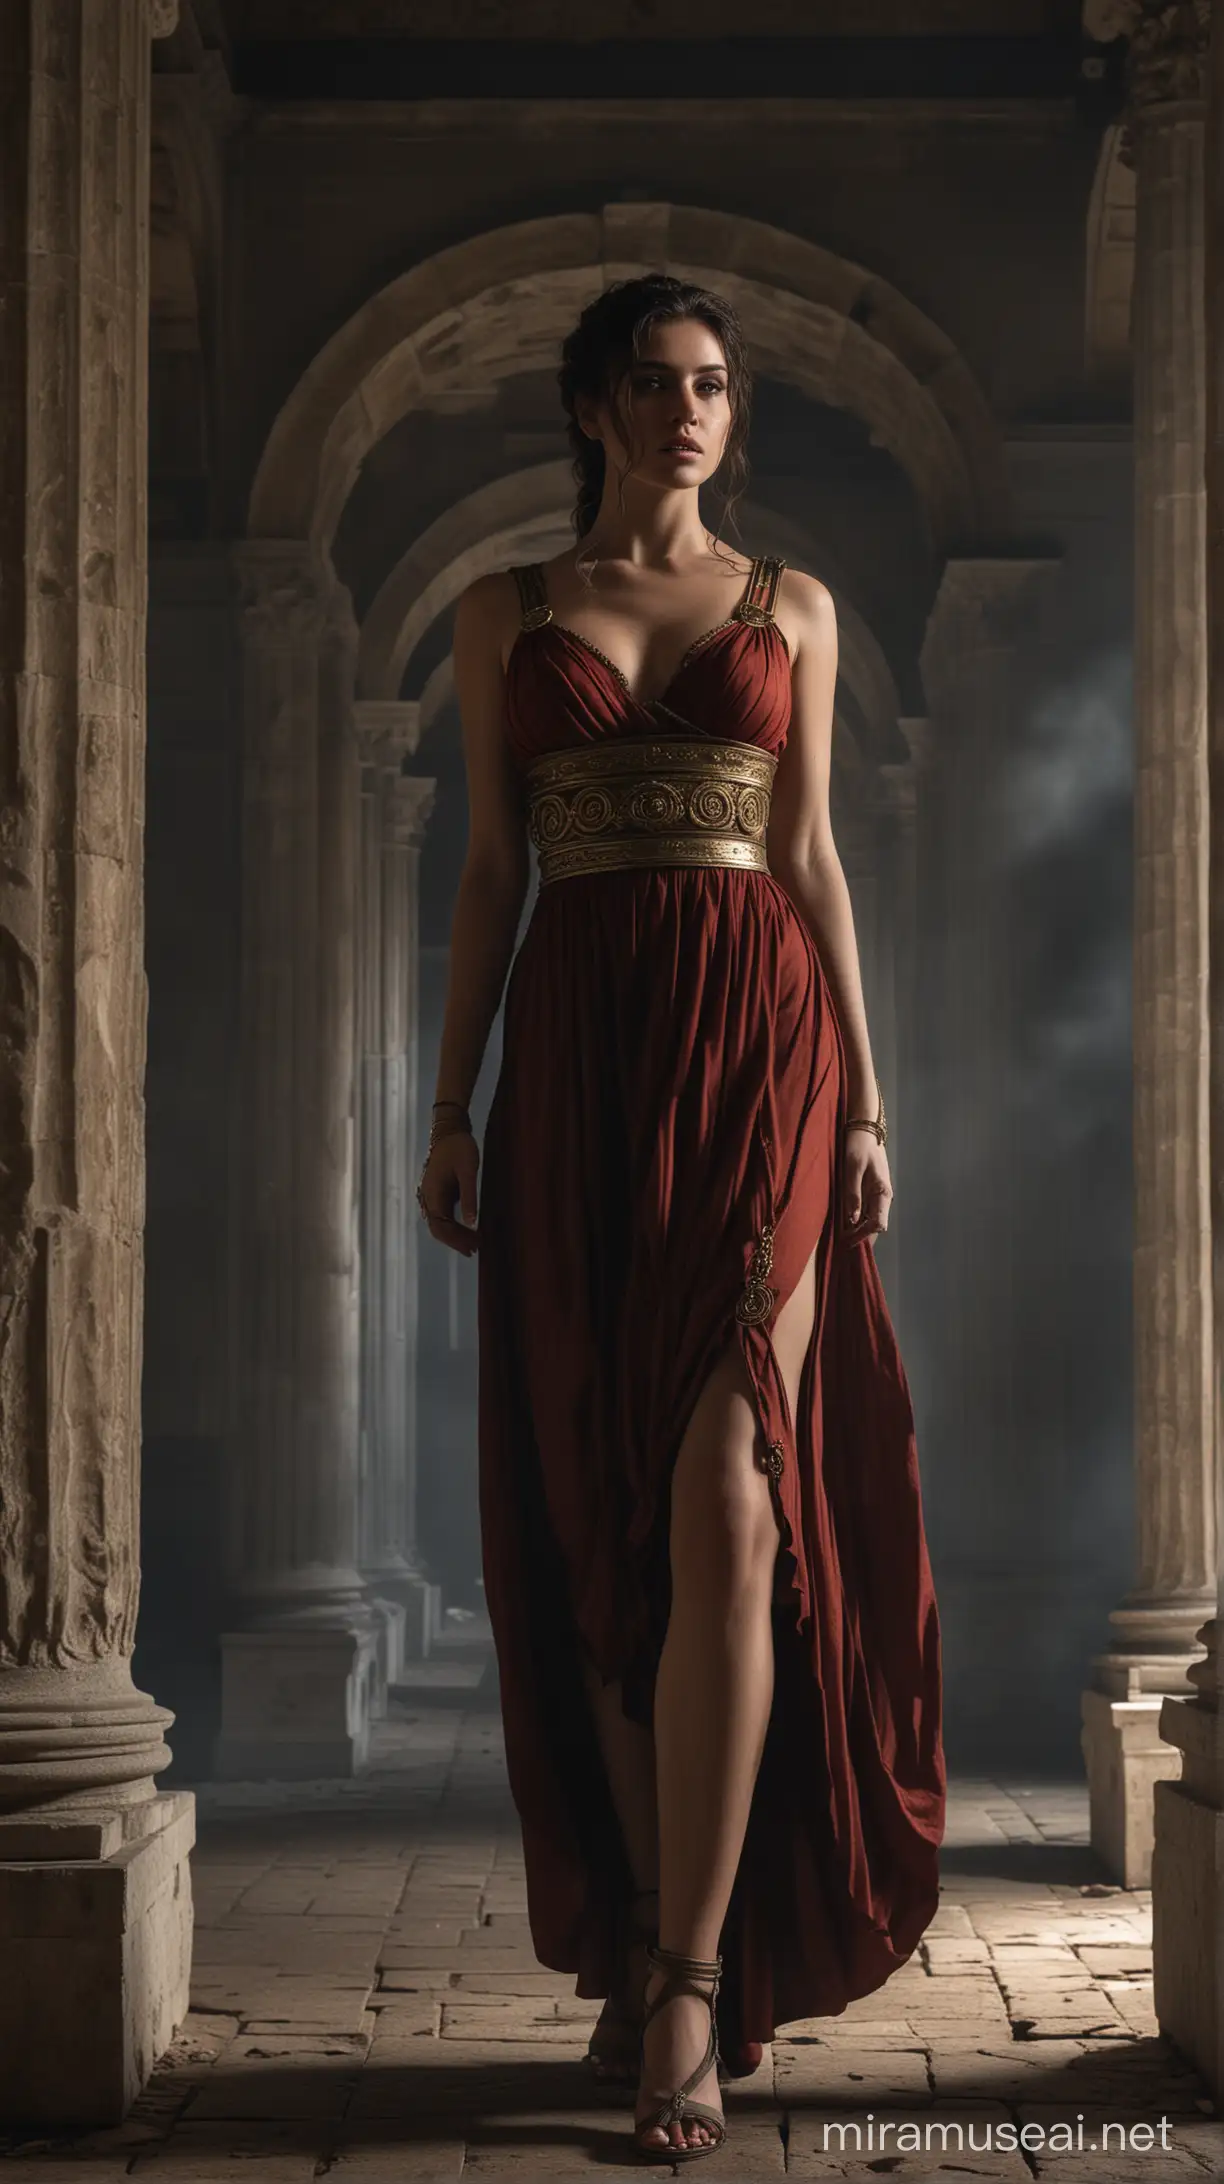 Seductive Woman in Ancient Roman Attire in Moody Palace Setting